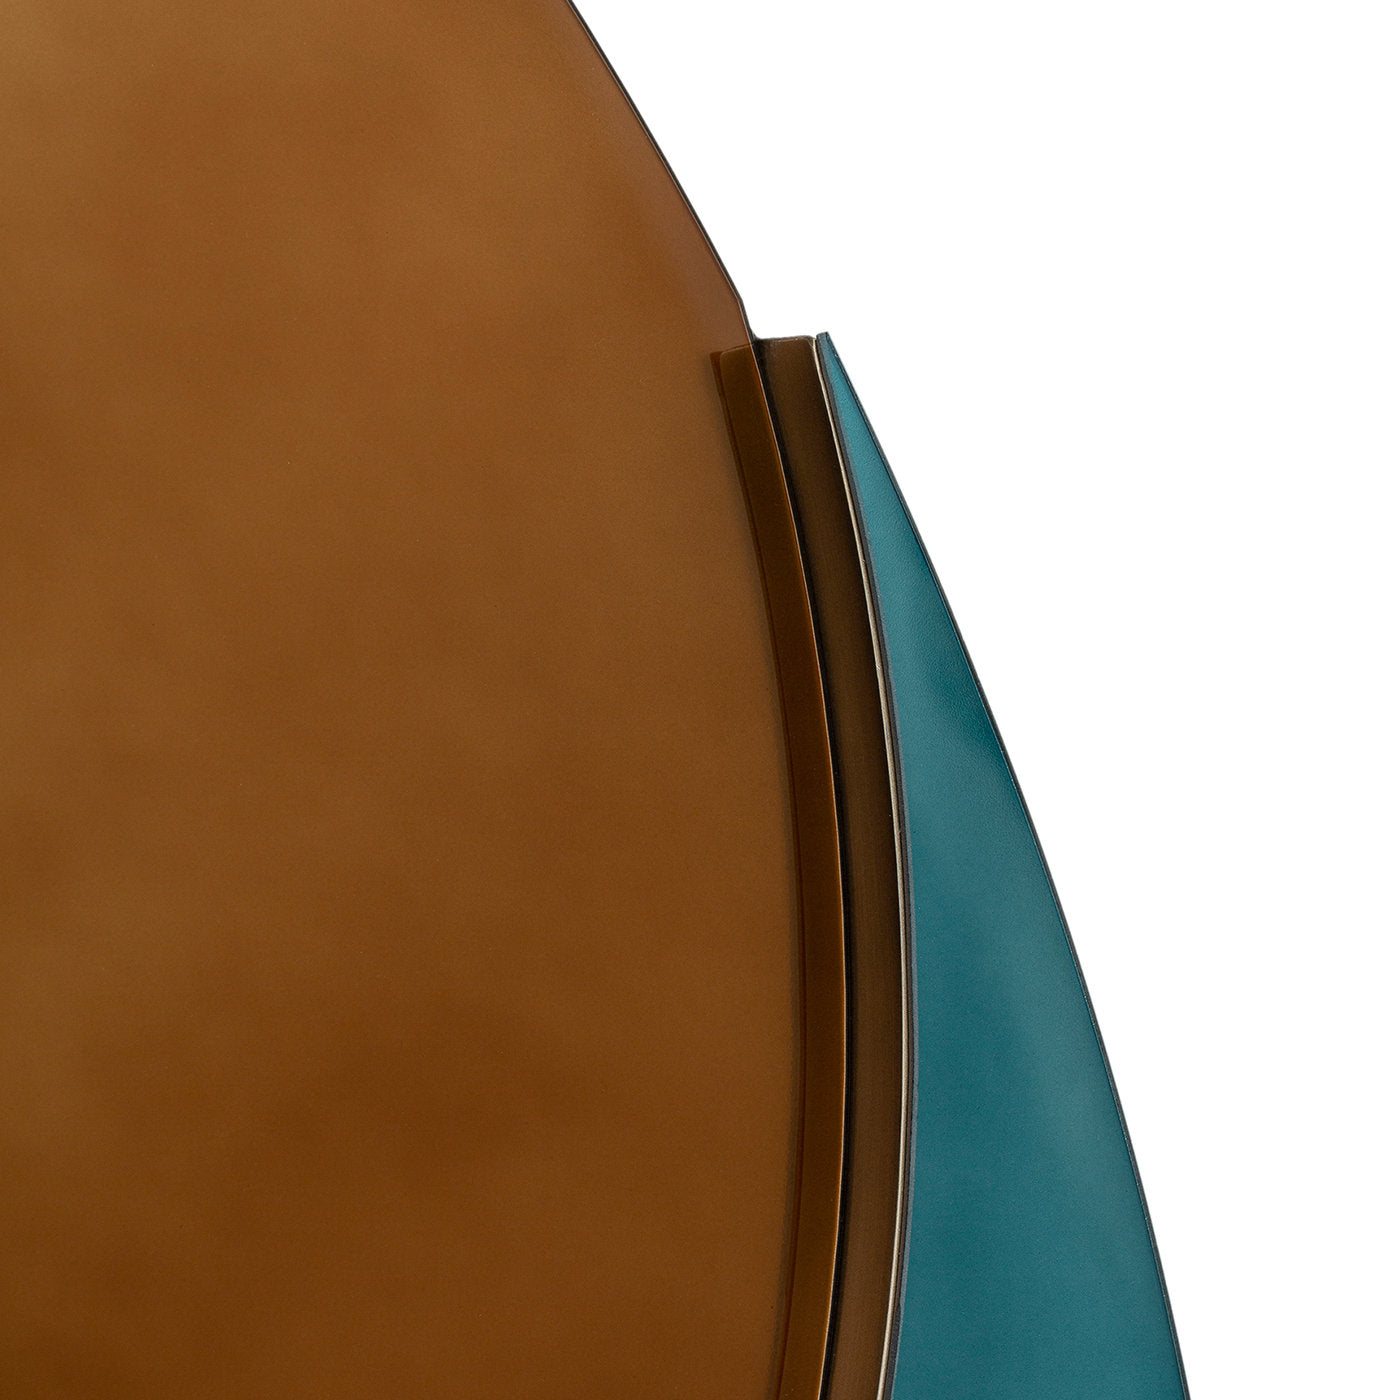 Duo Oval Mirror in Teal and Beige - Alternative view 2